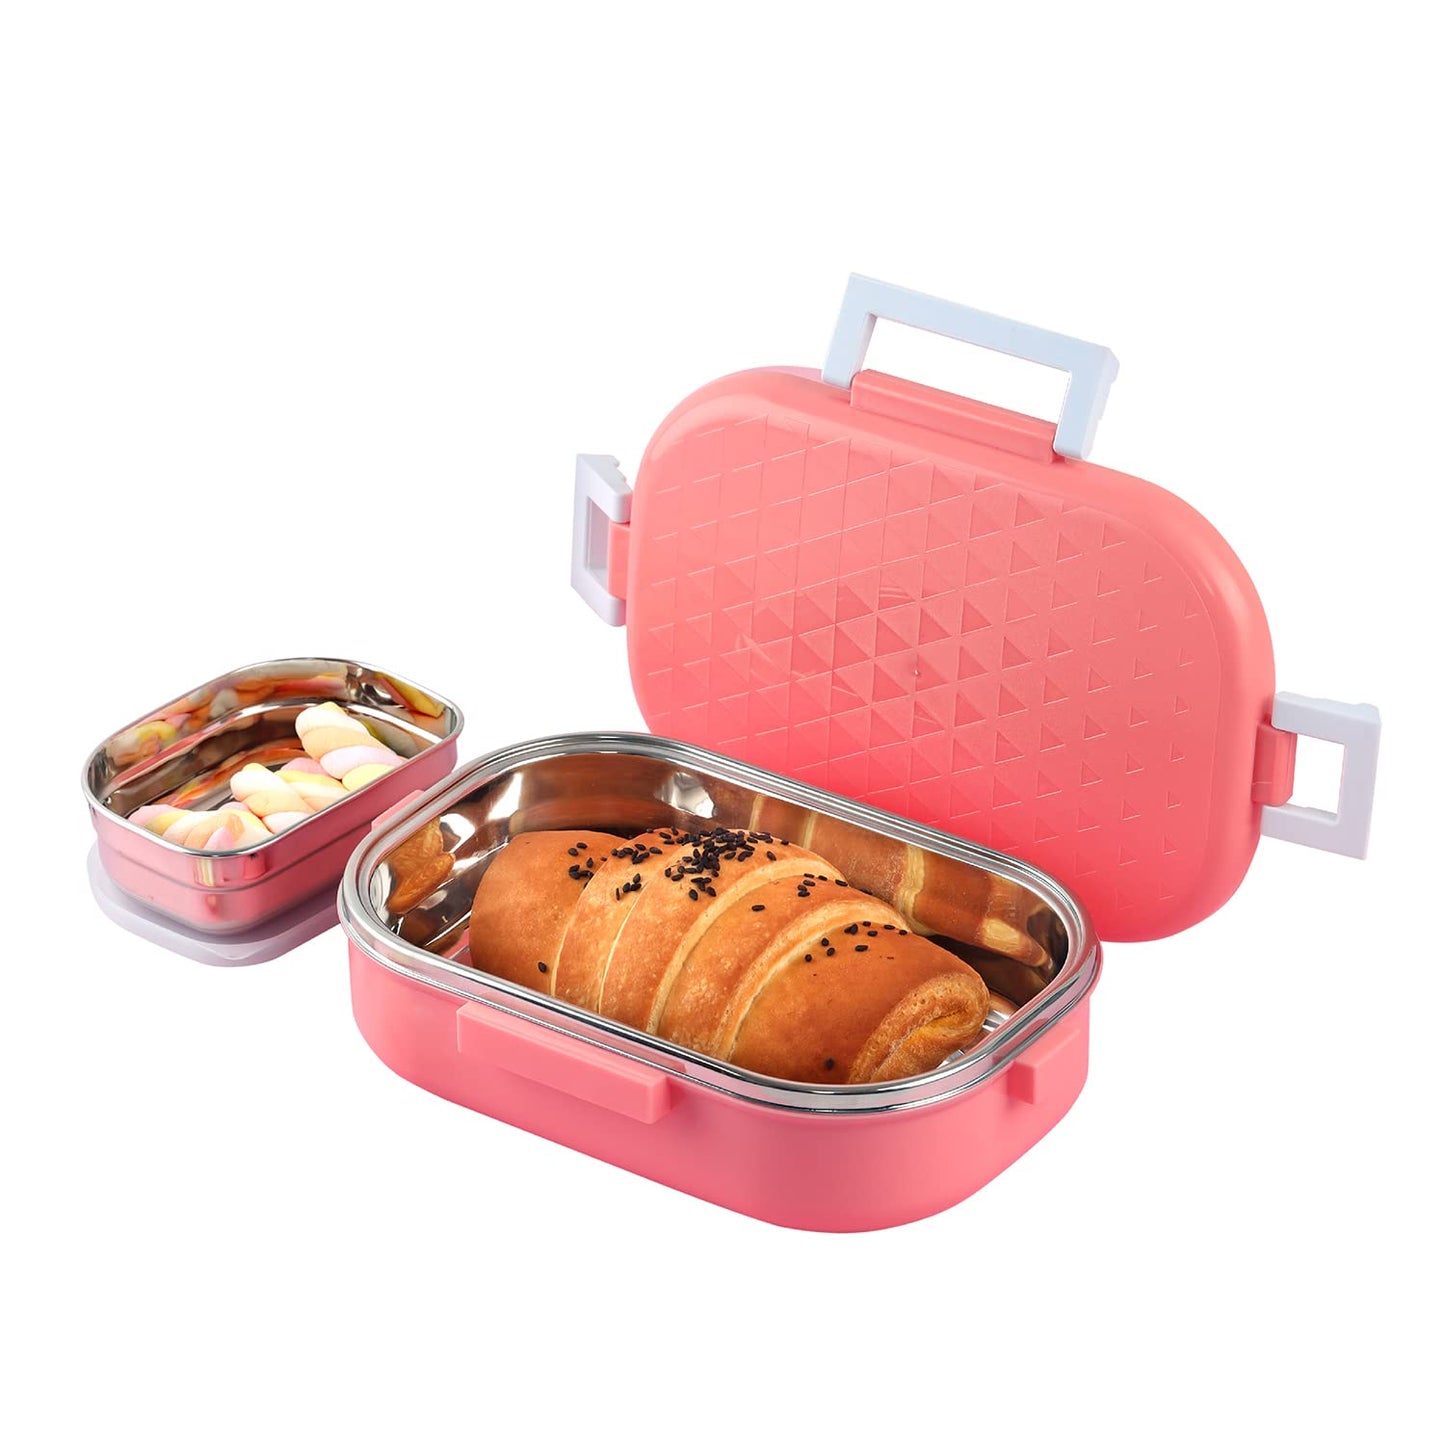 CELLO Altro Neo Lunch Box, Neo Pink, 700ml | 2 Units Insulated Lunch Boxes |Stainless Steel Lunch Box for Kids | Leak-Proof Snacks Tiffin Box for School